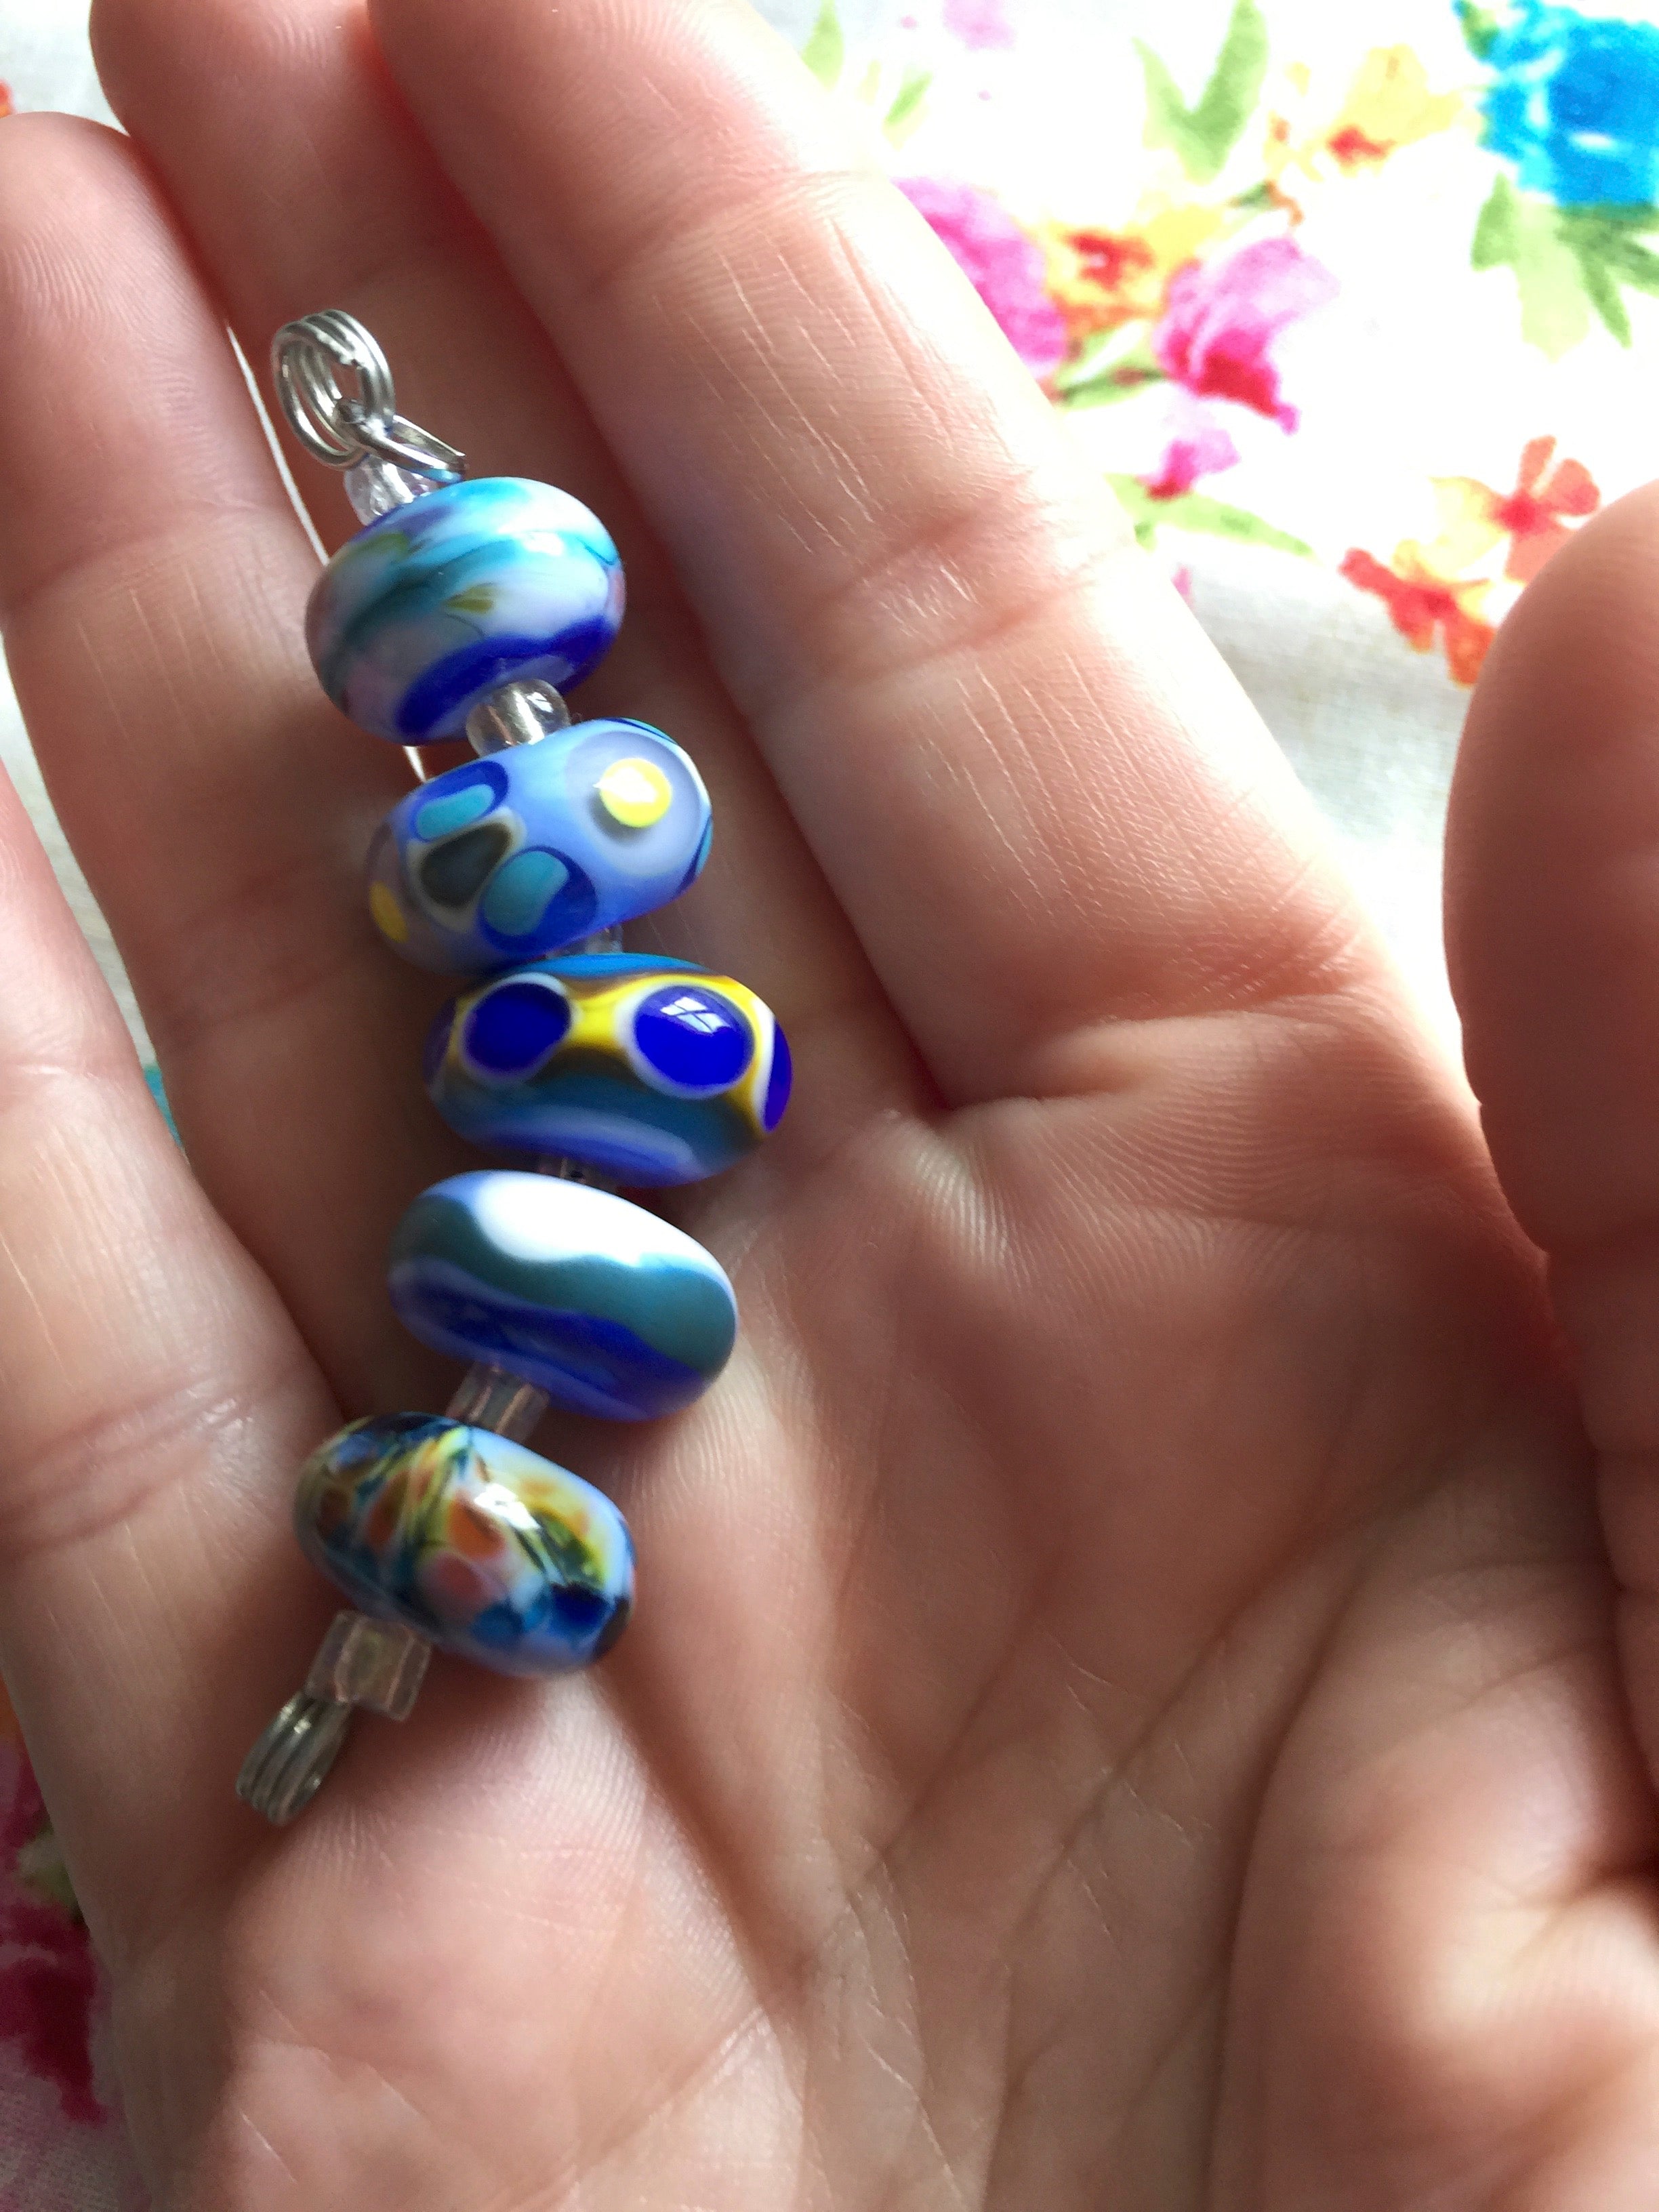 Set of 5 Handcrafted Lampwork Glass Beads in shades of Blues.